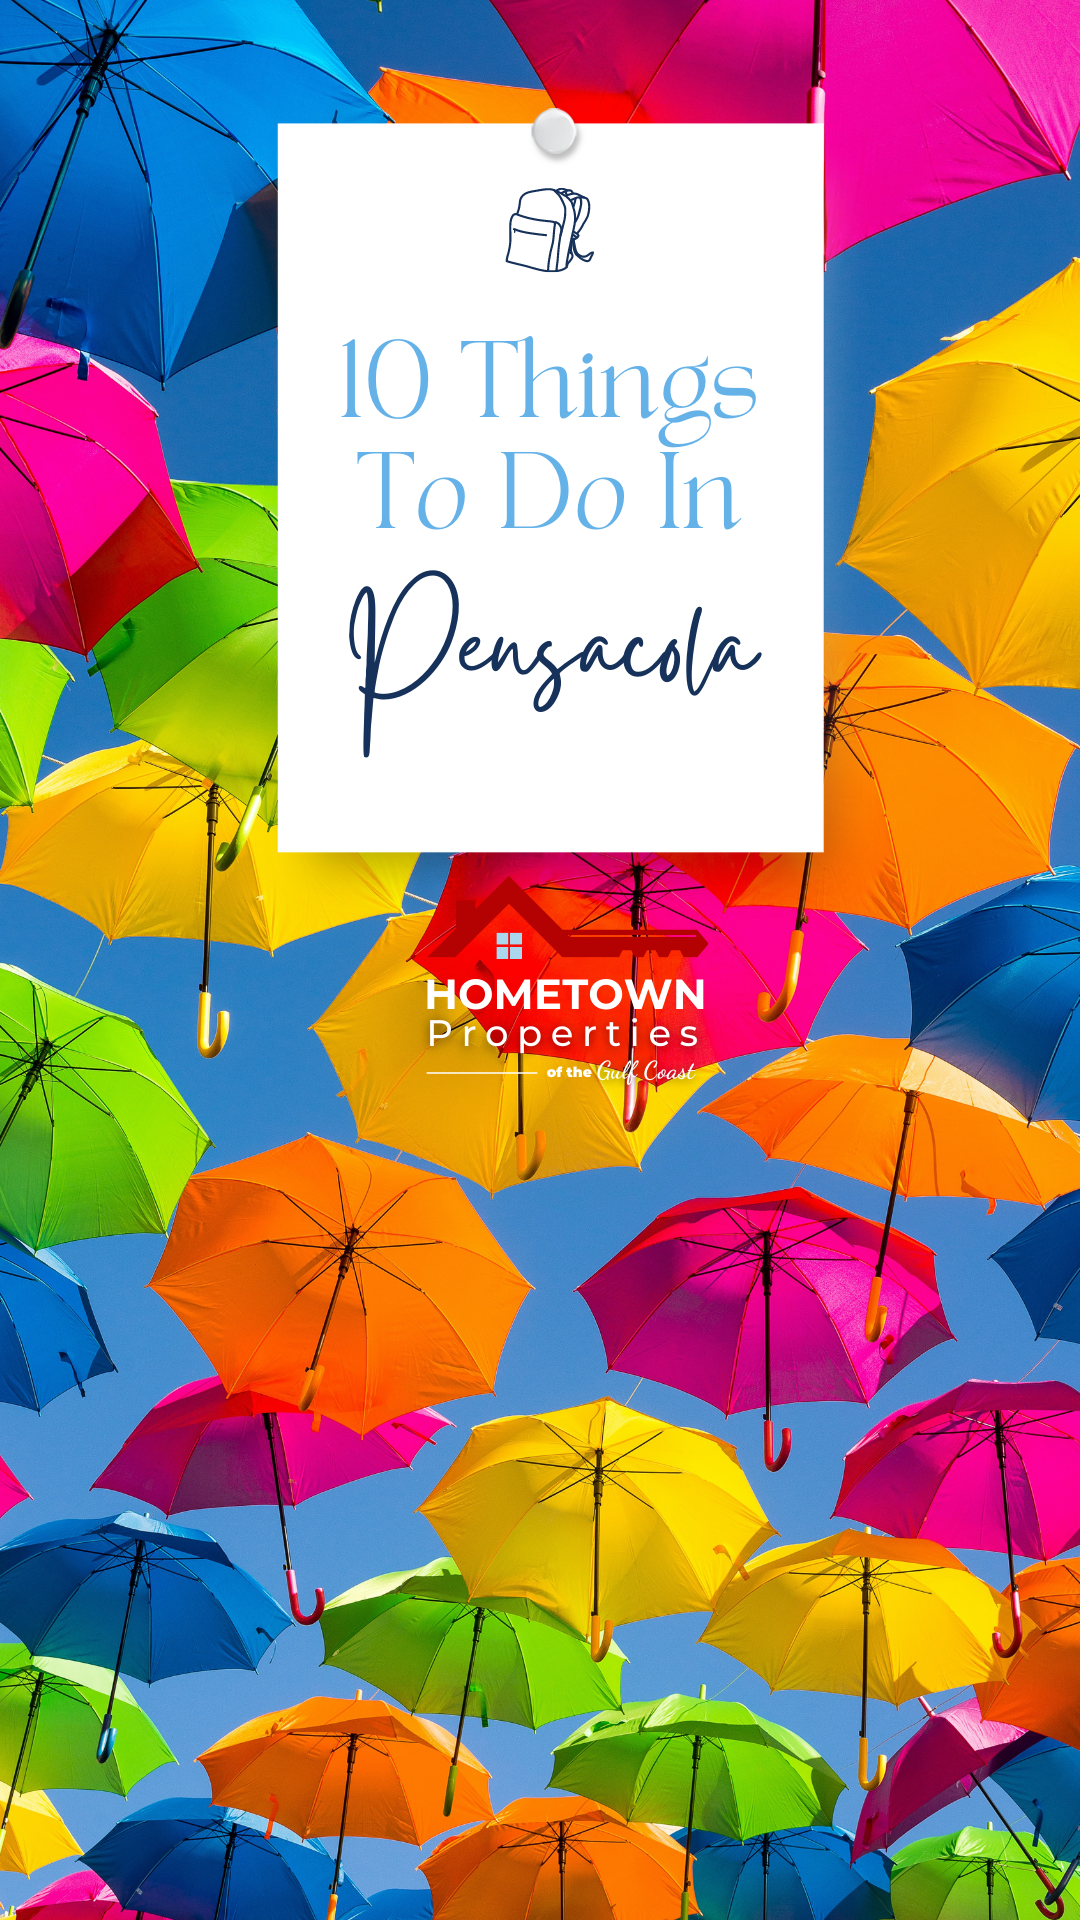 10 Must-Visit Local Attractions in Pensacola: Discover Hidden Gems and Popular Tourist Spots